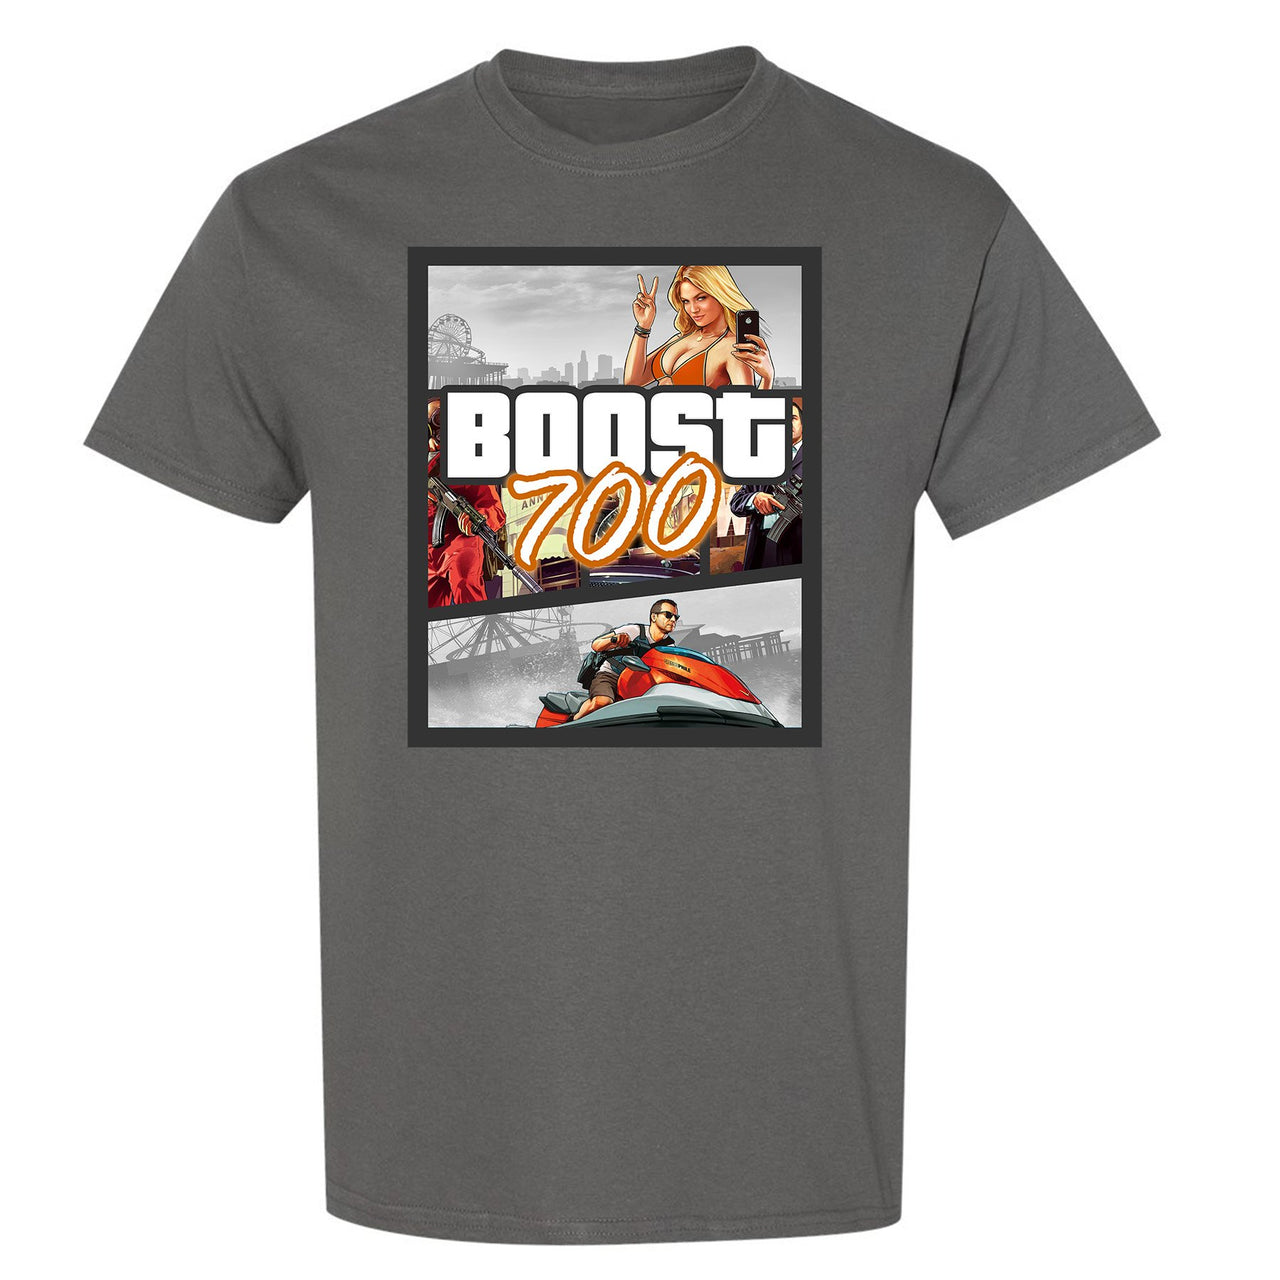 Magnet 700s T Shirt | Video Game Cover, Charcoal